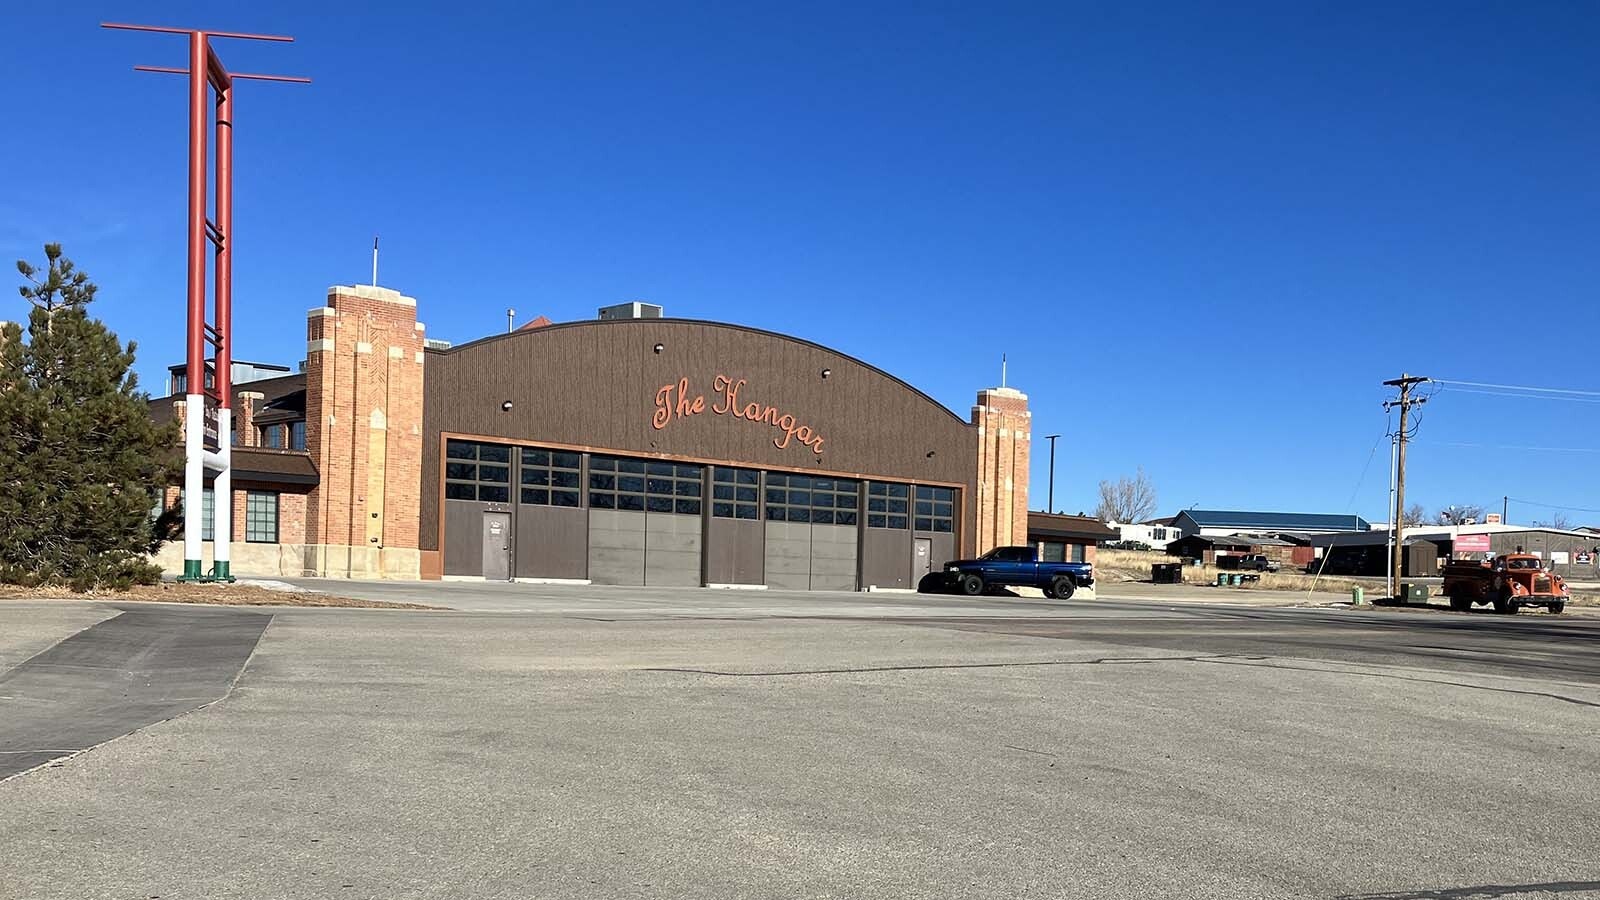 “The Hangar” restaurant now in Barr Nunn is the actual hangar that was used at the airport for aircraft, then transitioned to a riding facility, and now is a restaurant and events facility.